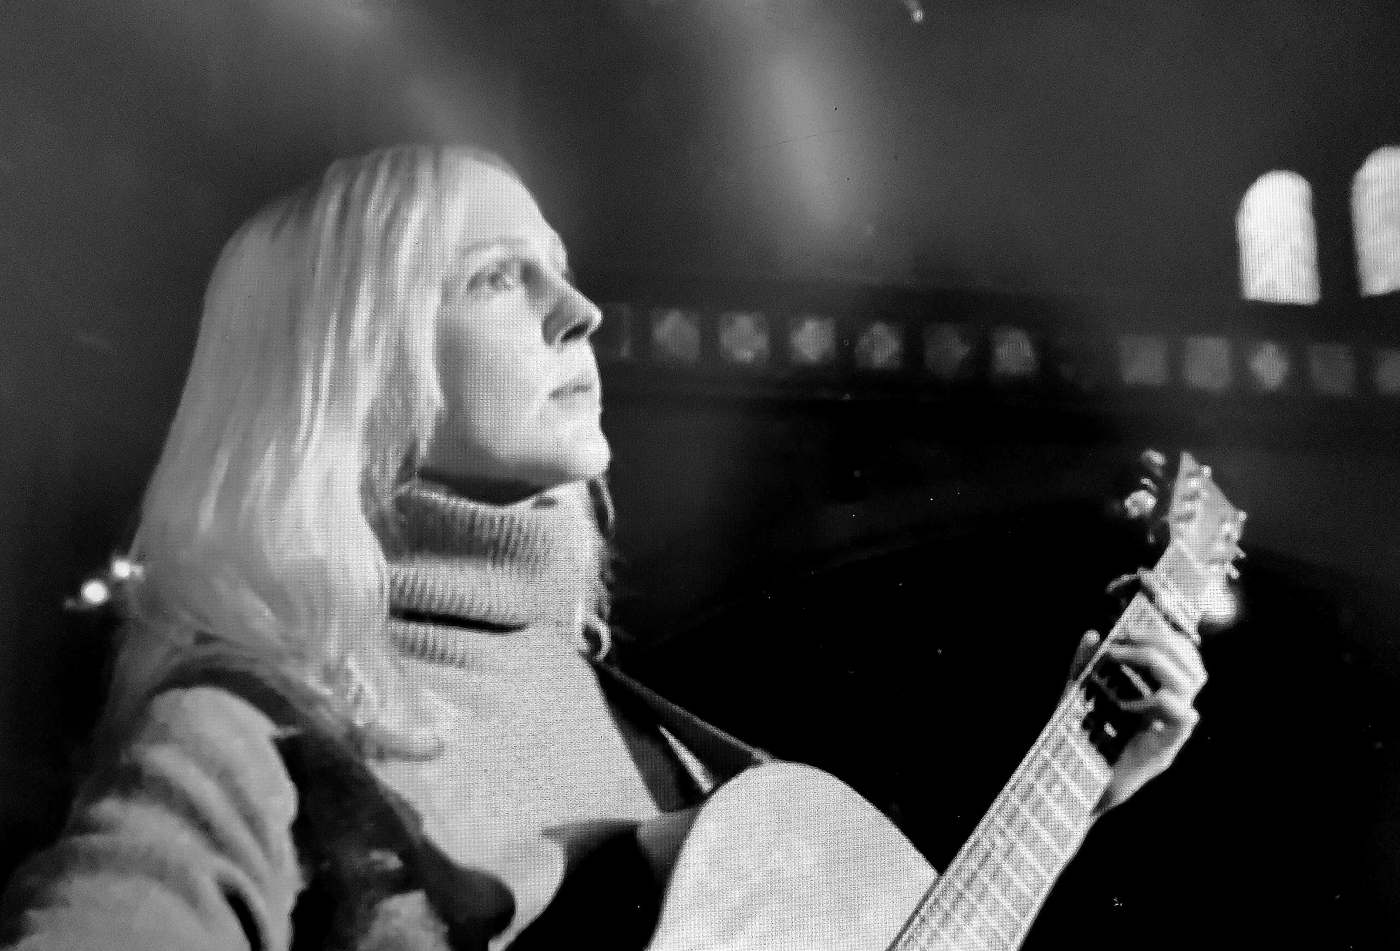 Image is Greyscale. Laura Marling stands alone on stage, white-blonde hair falling around her face, wearing a comfortable looking grey jumper. She performs with only an acoustic guitar, and gazes off into the middle distance.